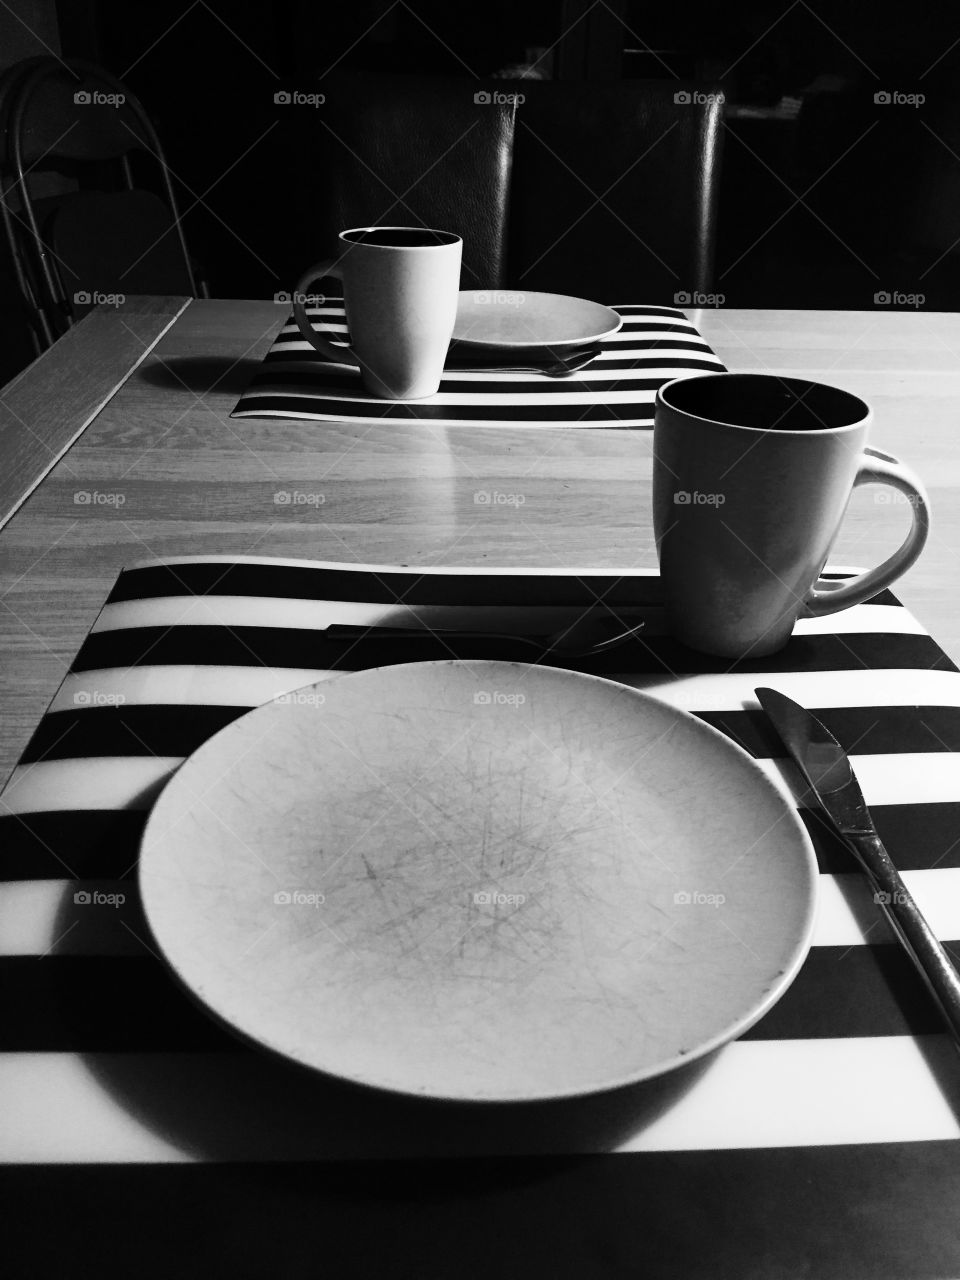 
Cups and plates - Morning rituals